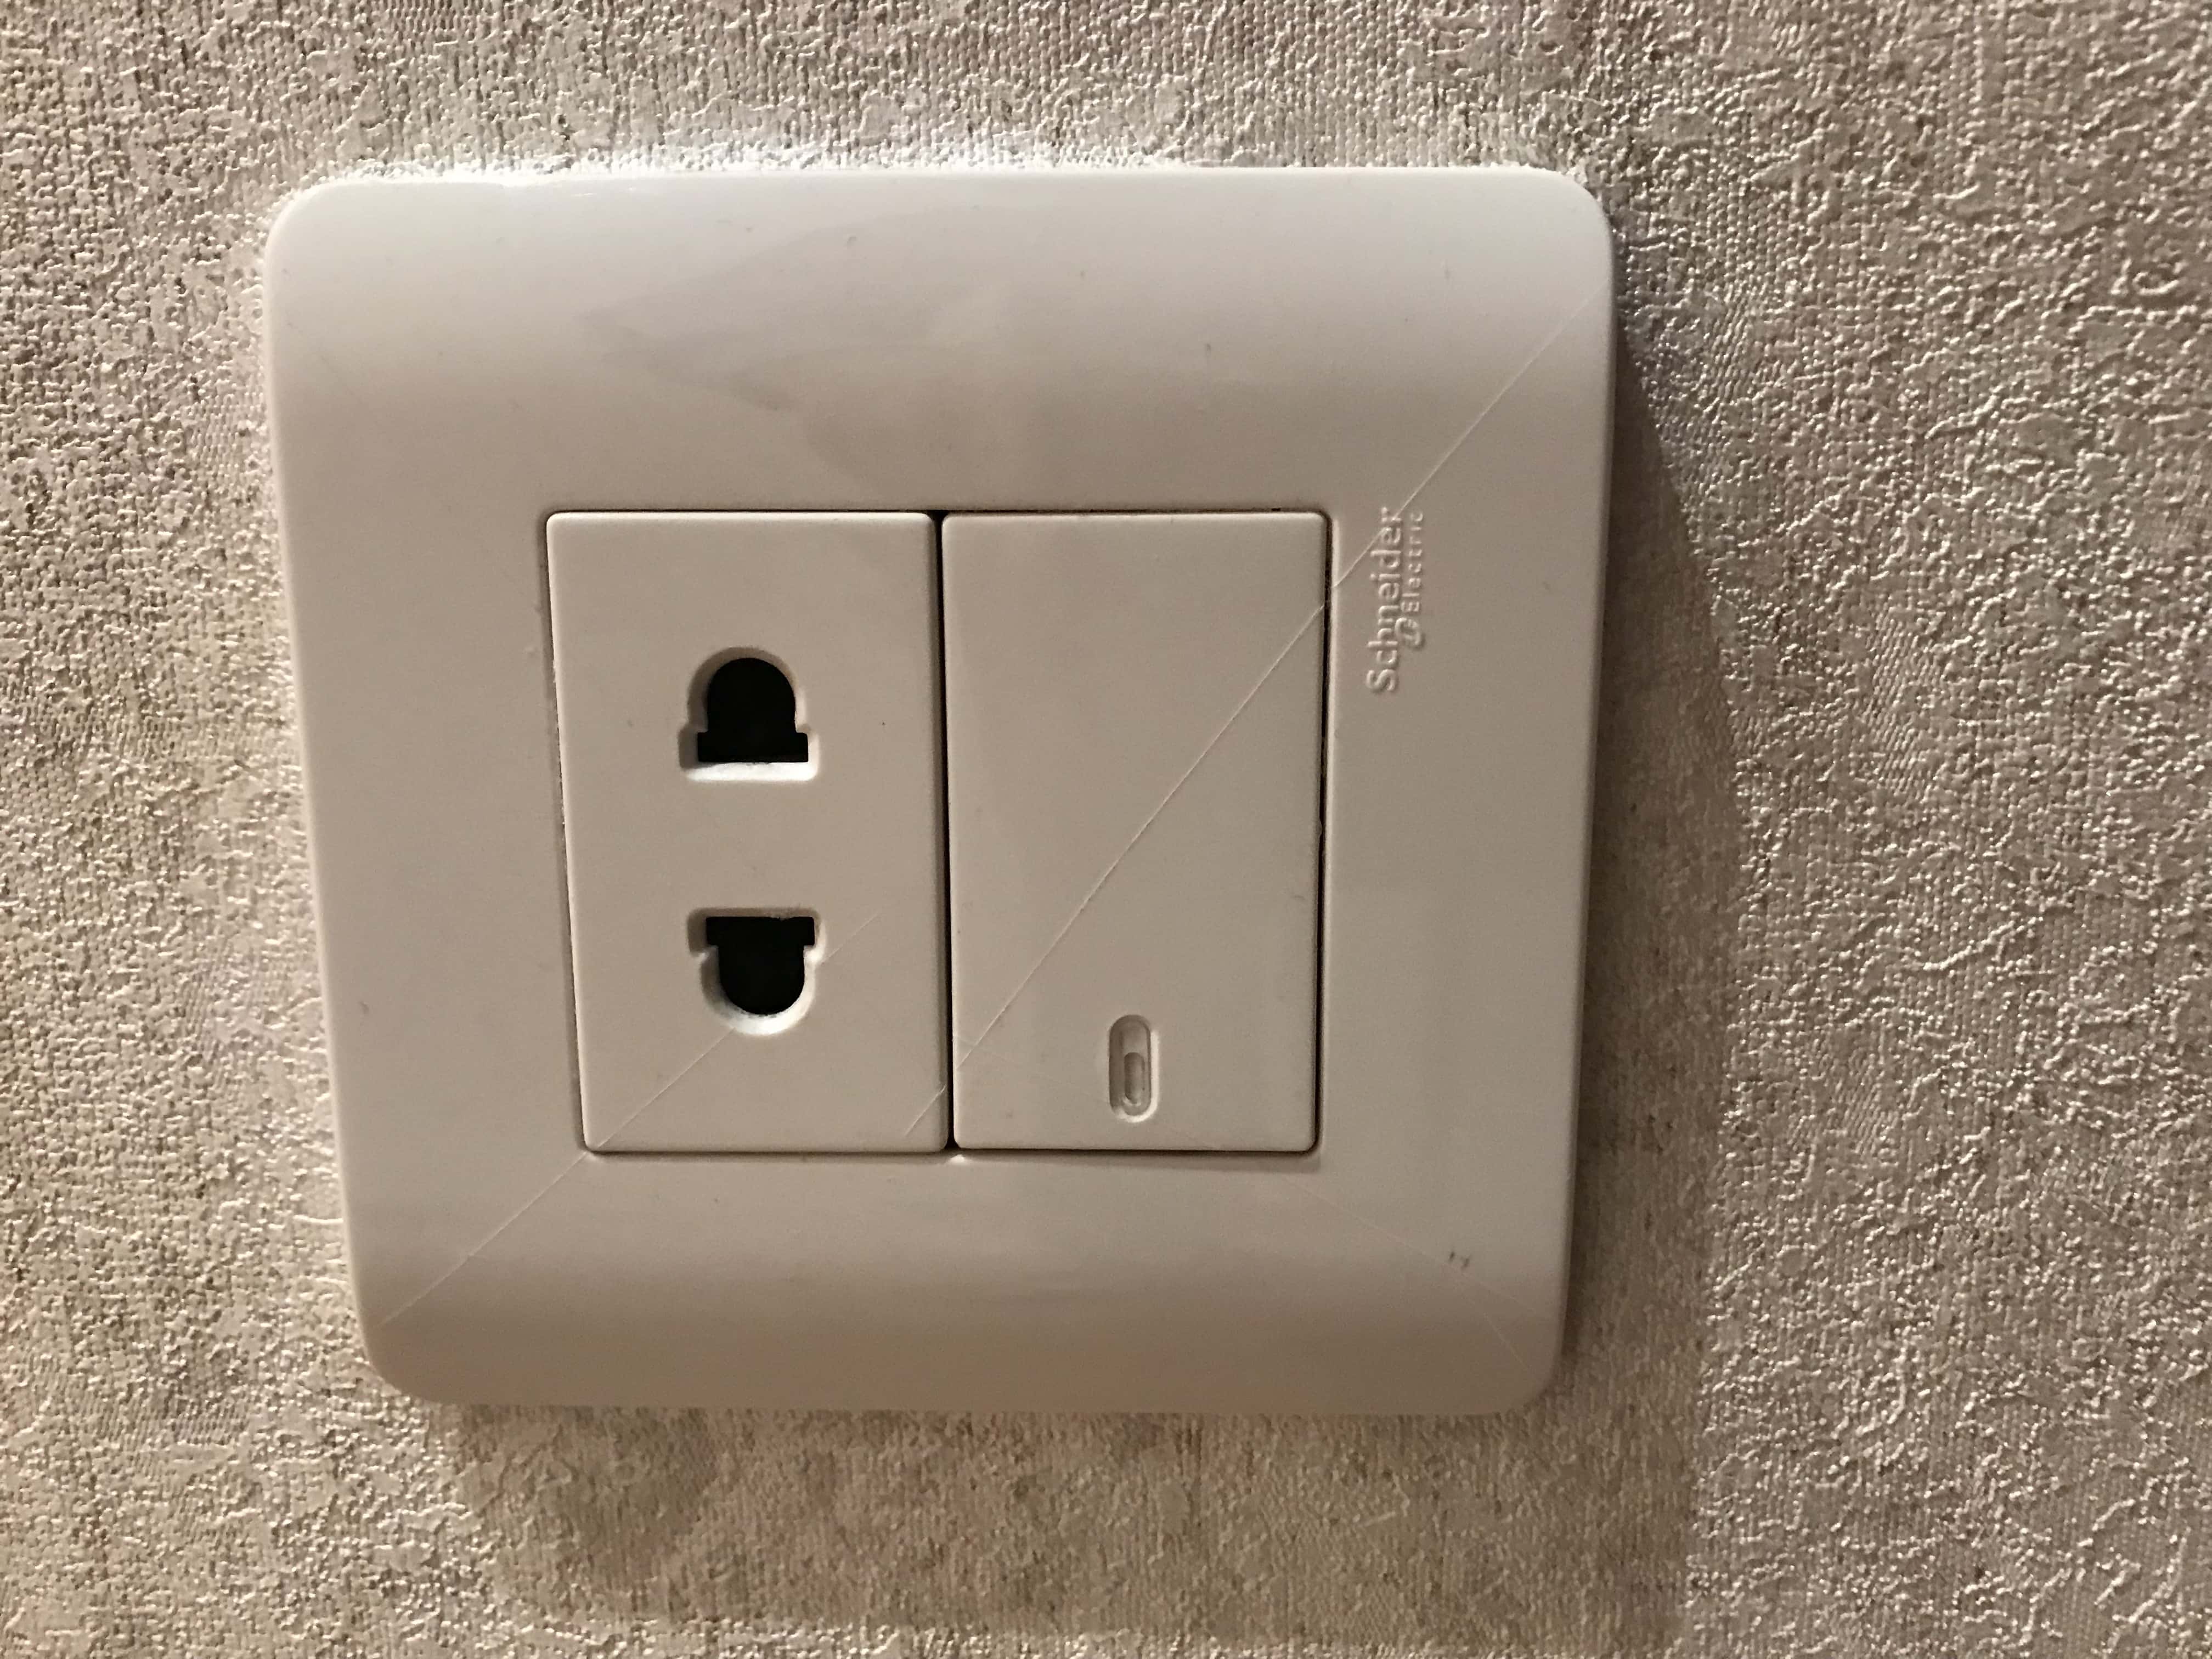 Japanese electrical outlet